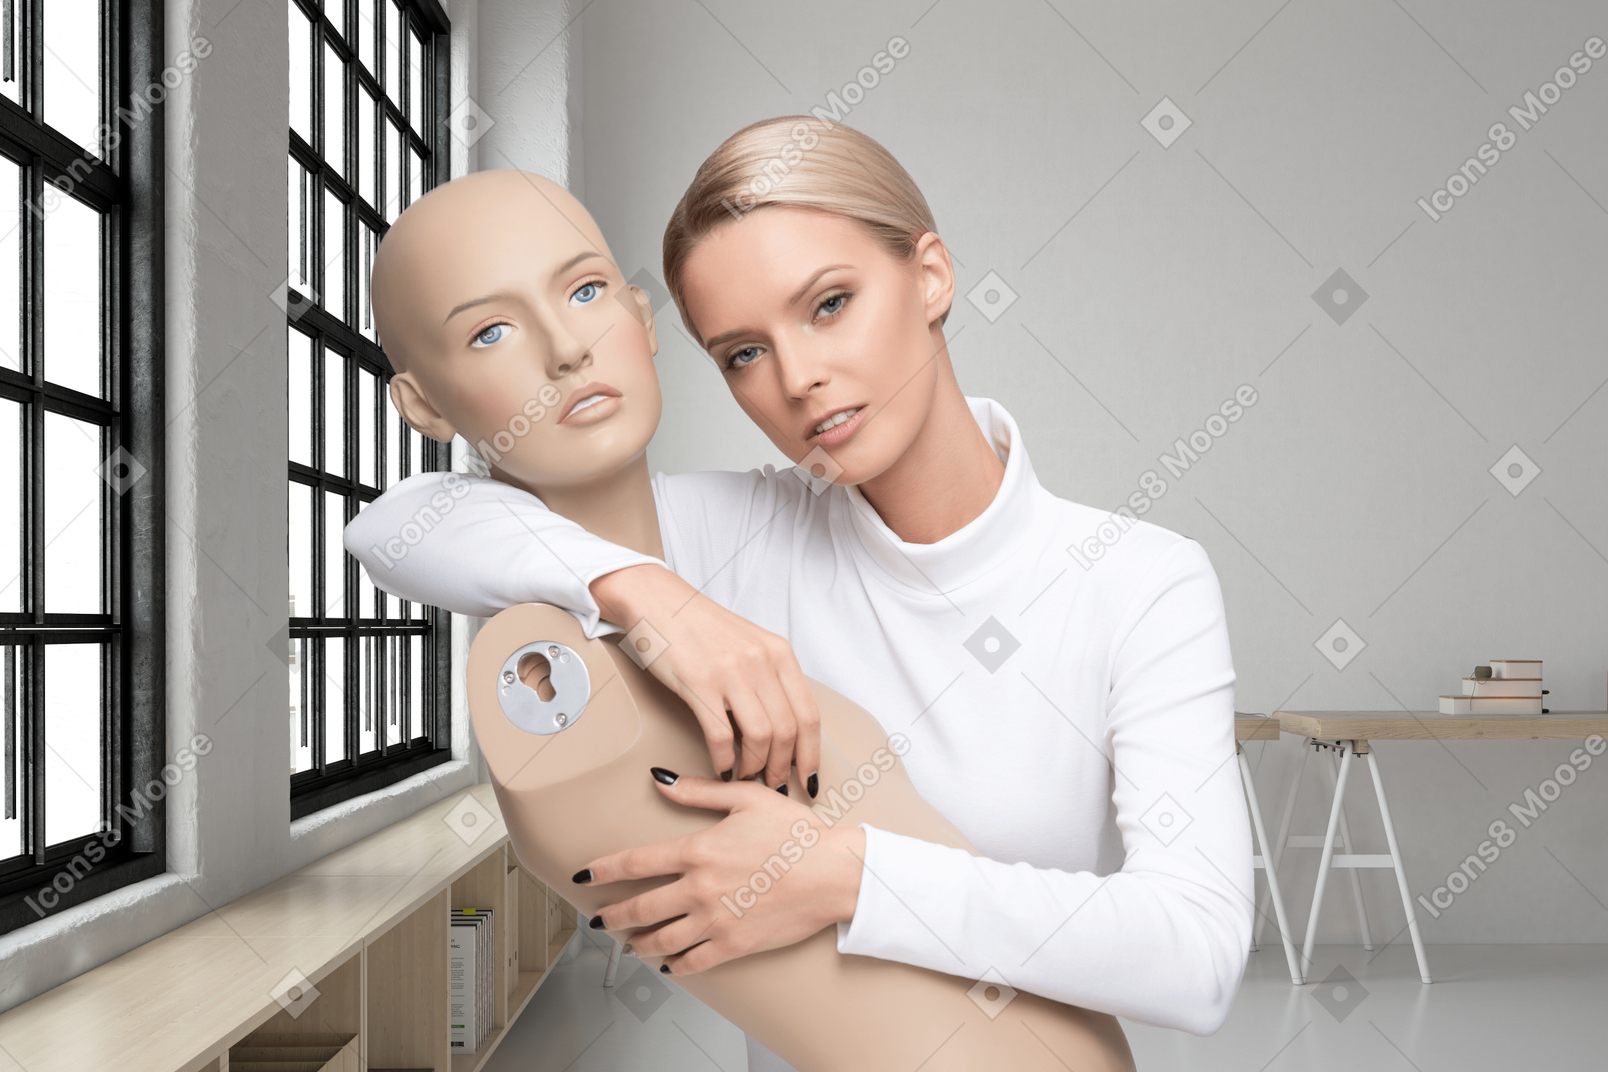 Beautiful woman holding mannequin